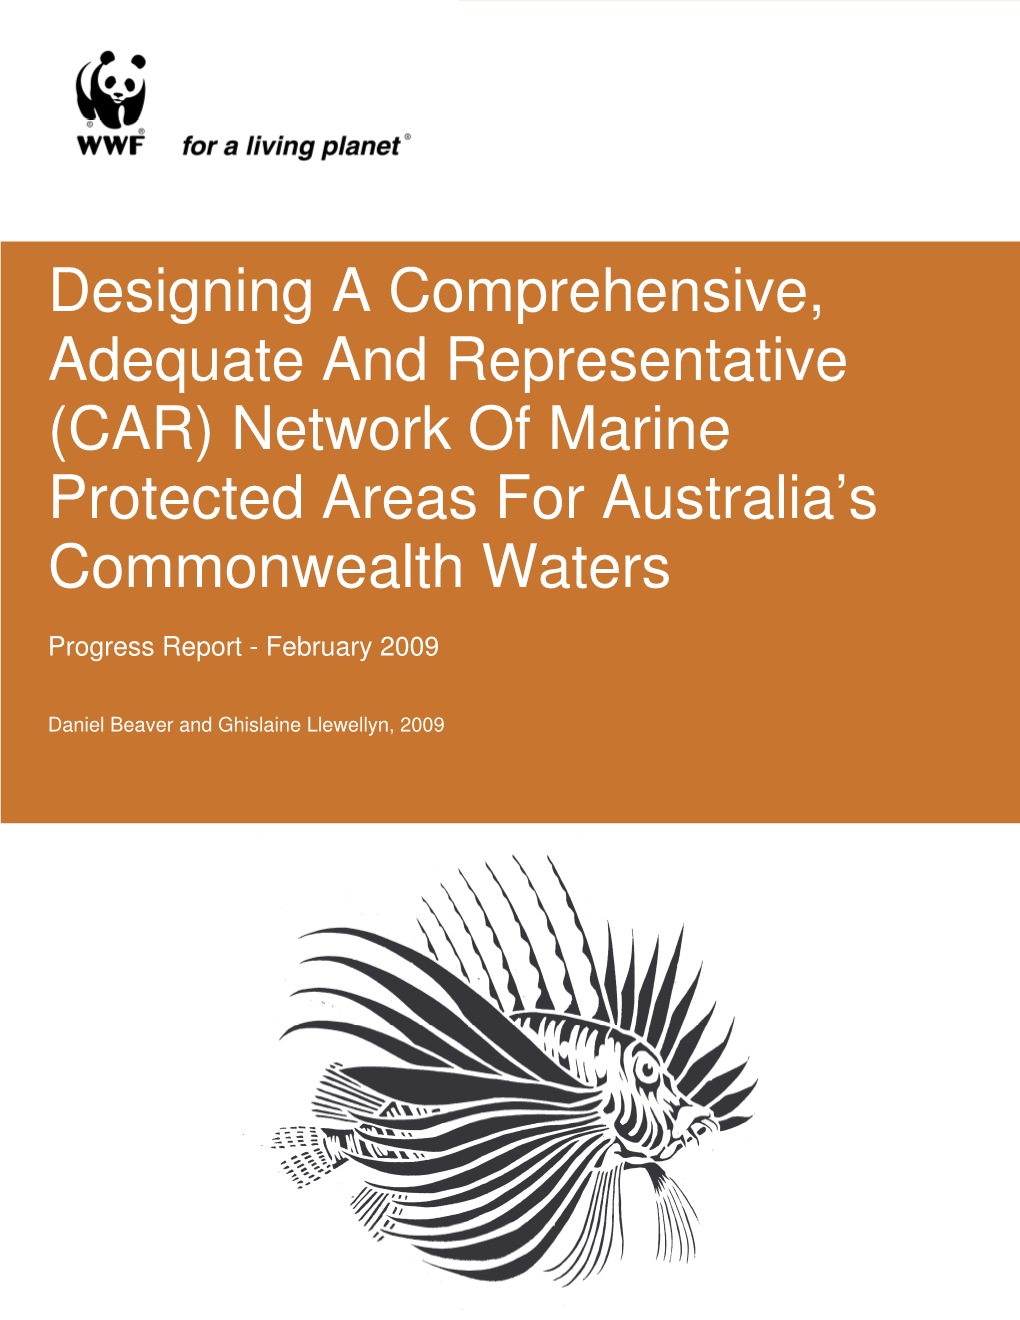 (CAR) Network of Marine Protected Areas for Australia’S Commonwealth Waters